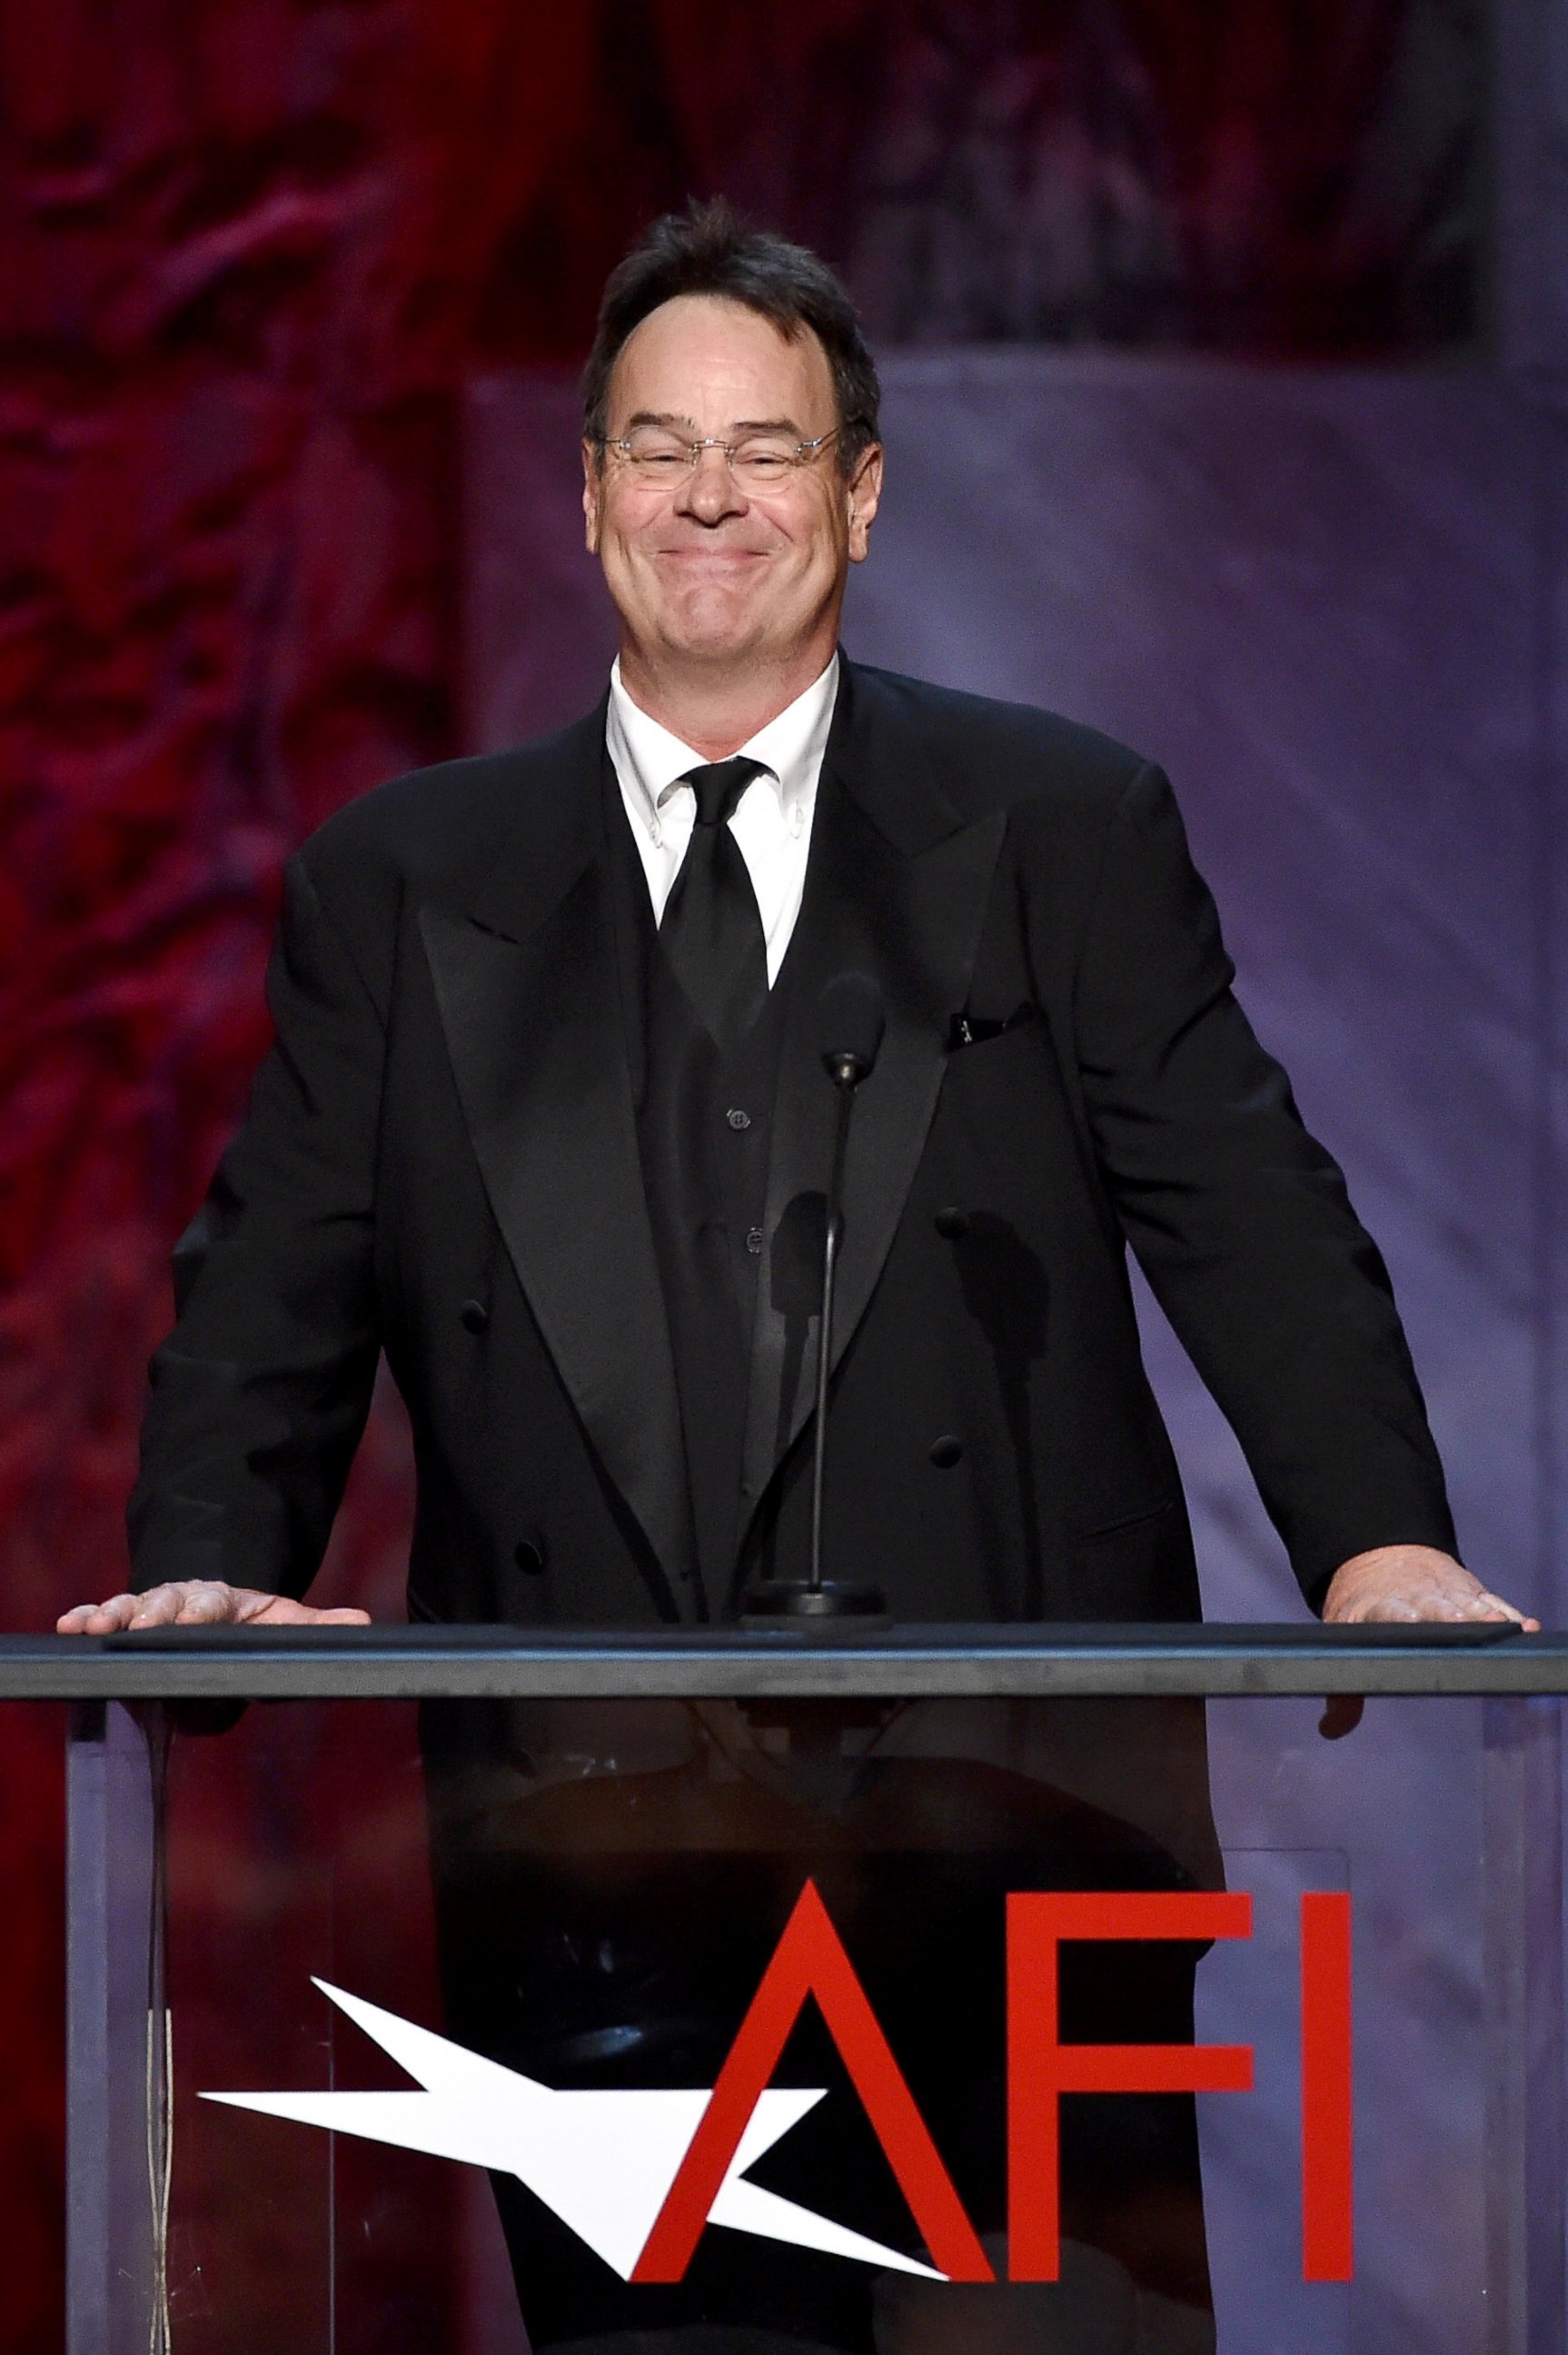 PHOTO: Dan Aykroyd speaks onstage during the 2015 AFI Life Achievement Award Gala Tribute Honoring Steve Martin at the Dolby Theatre, June 4, 2015, in Hollywood, Calif.